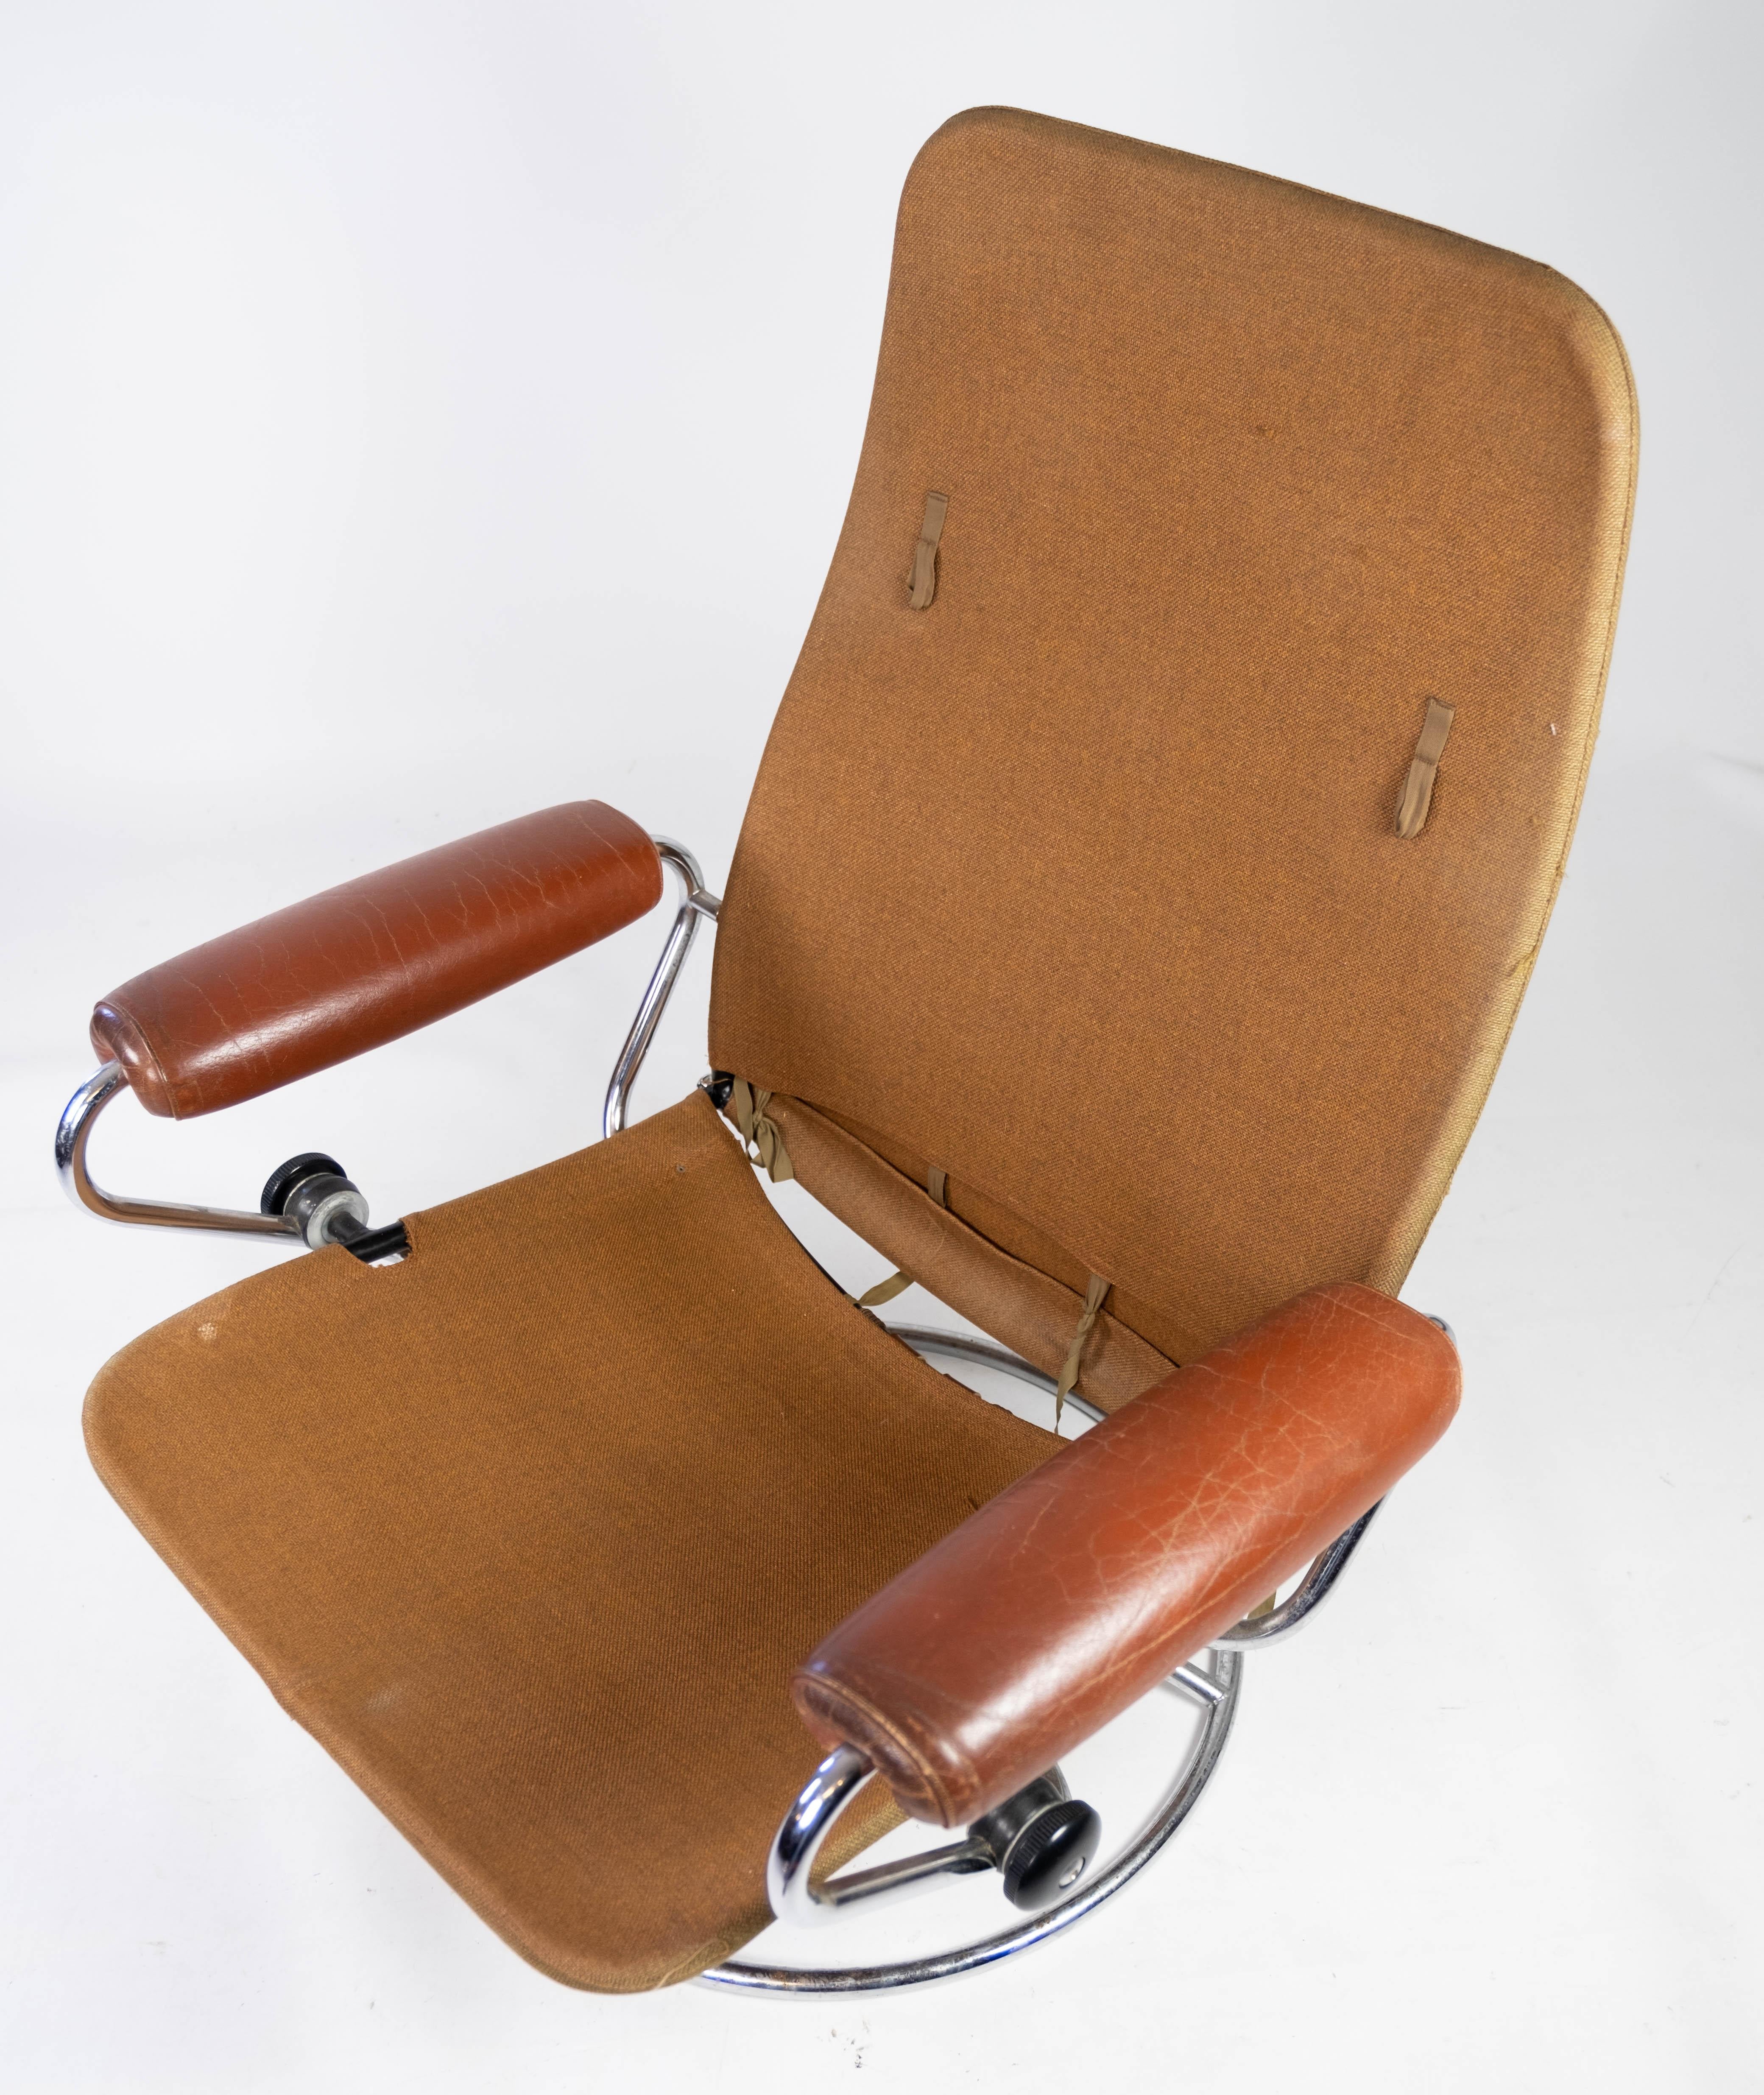 Armchair Upholstered with Red Leather and Frame of Metal, of Danish Design, 1960 For Sale 5